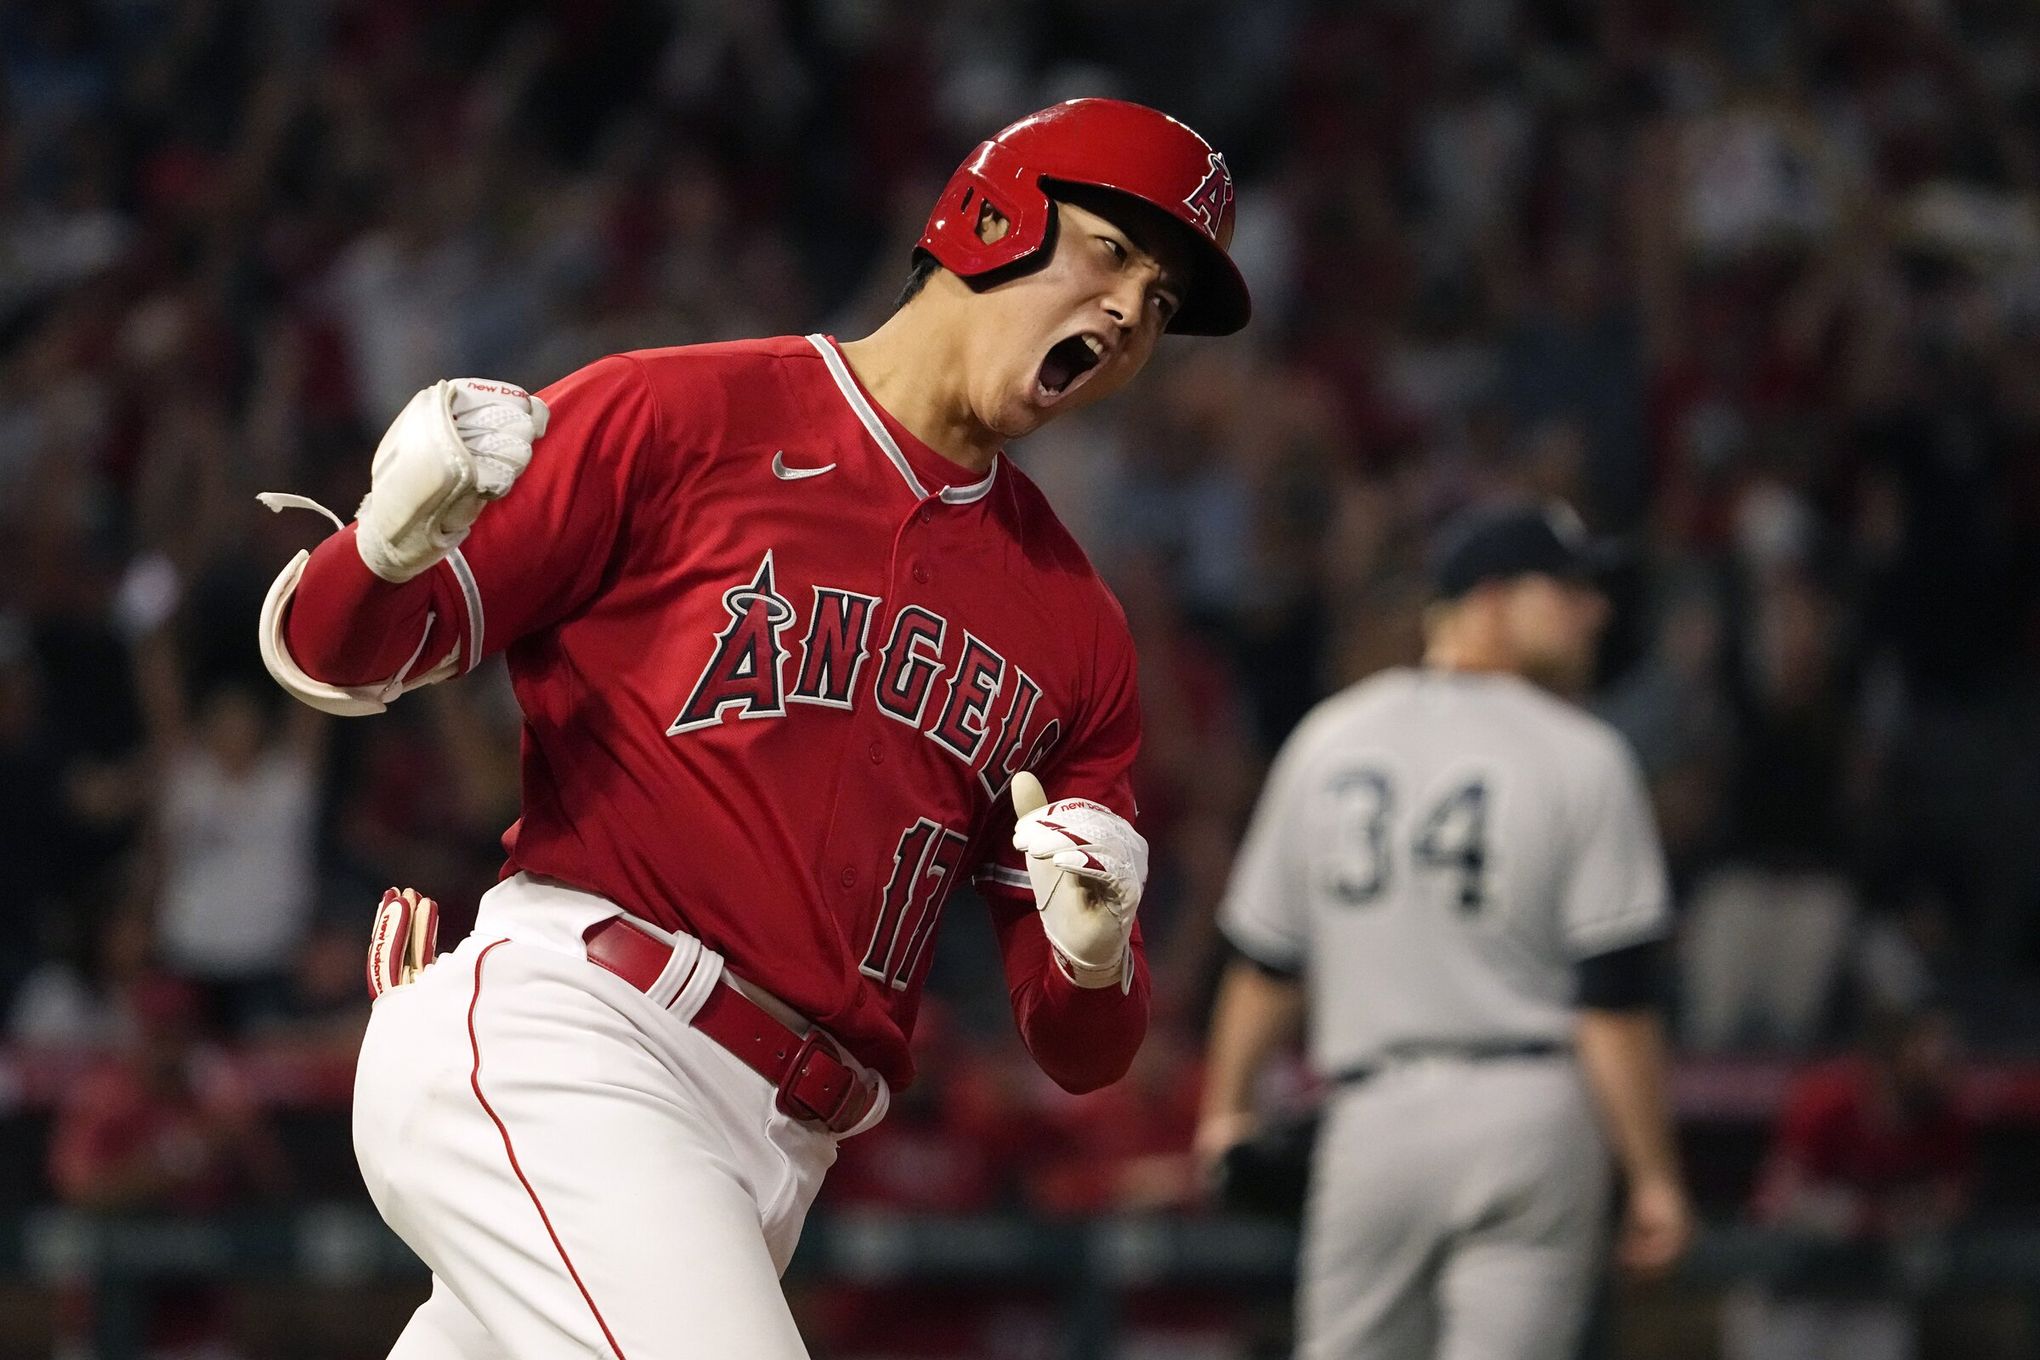 How to Watch the Mariners vs. Angels Game: Streaming & TV Info